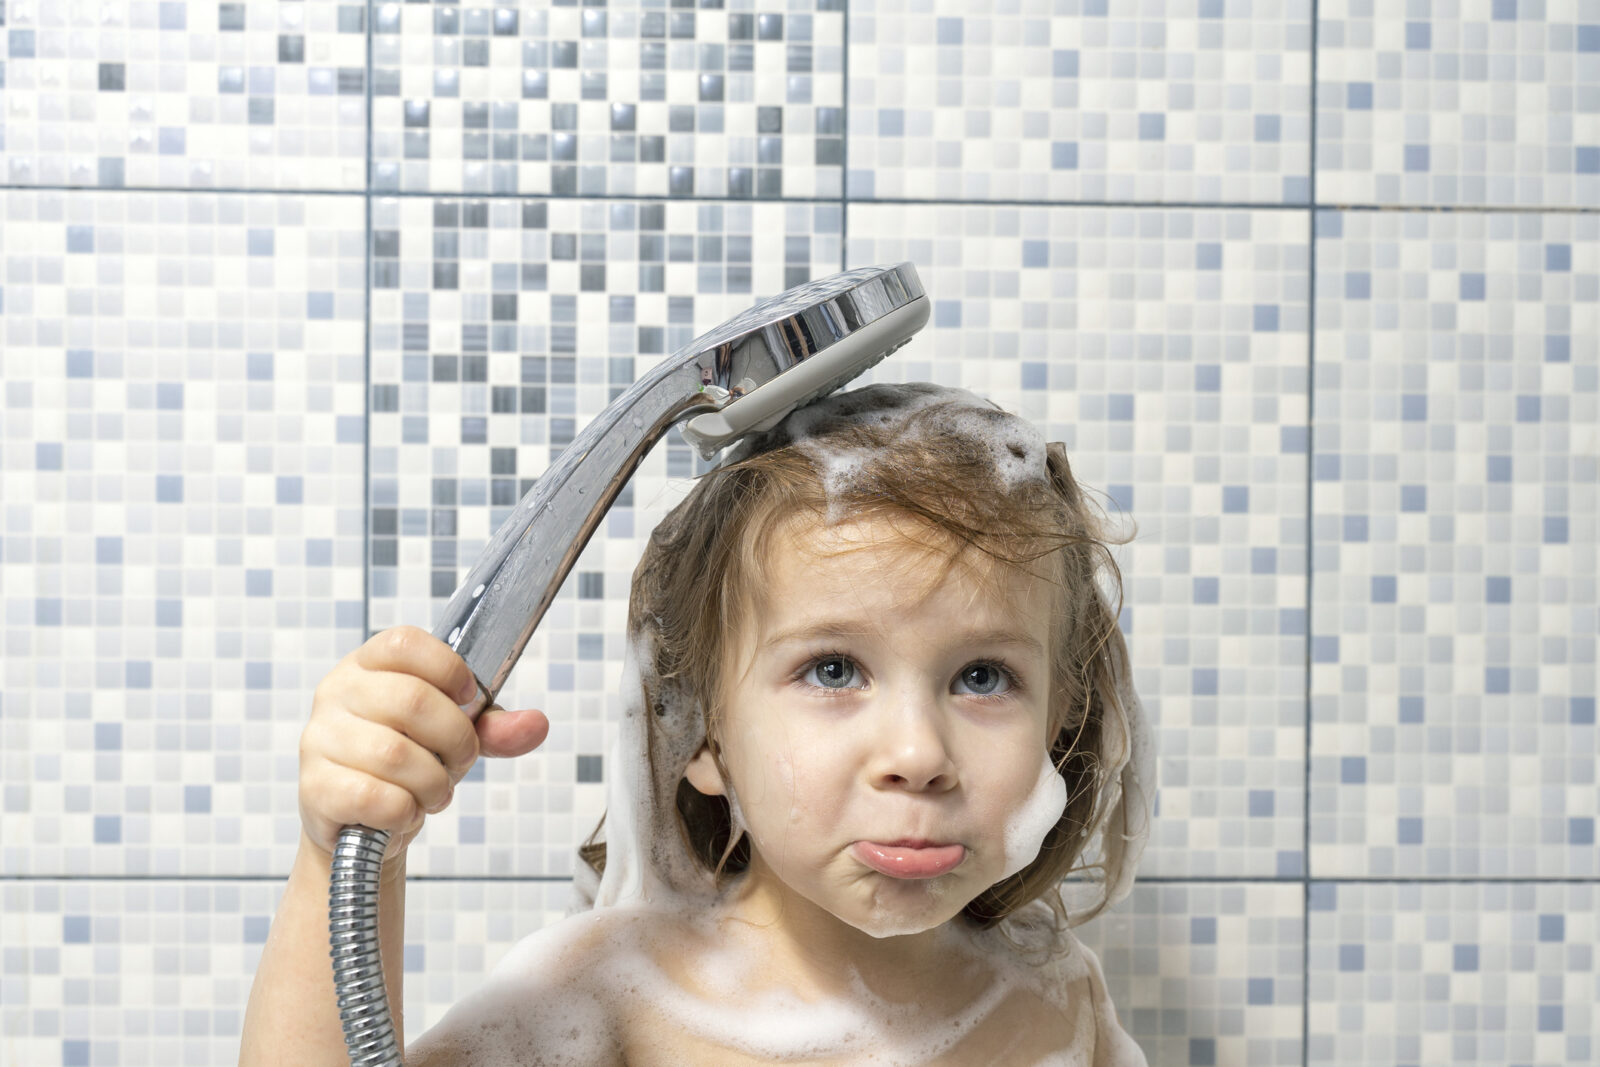 A child in the shower with a soapy head cannot rinse because the water stopped, for a post on Imagine a day without water.